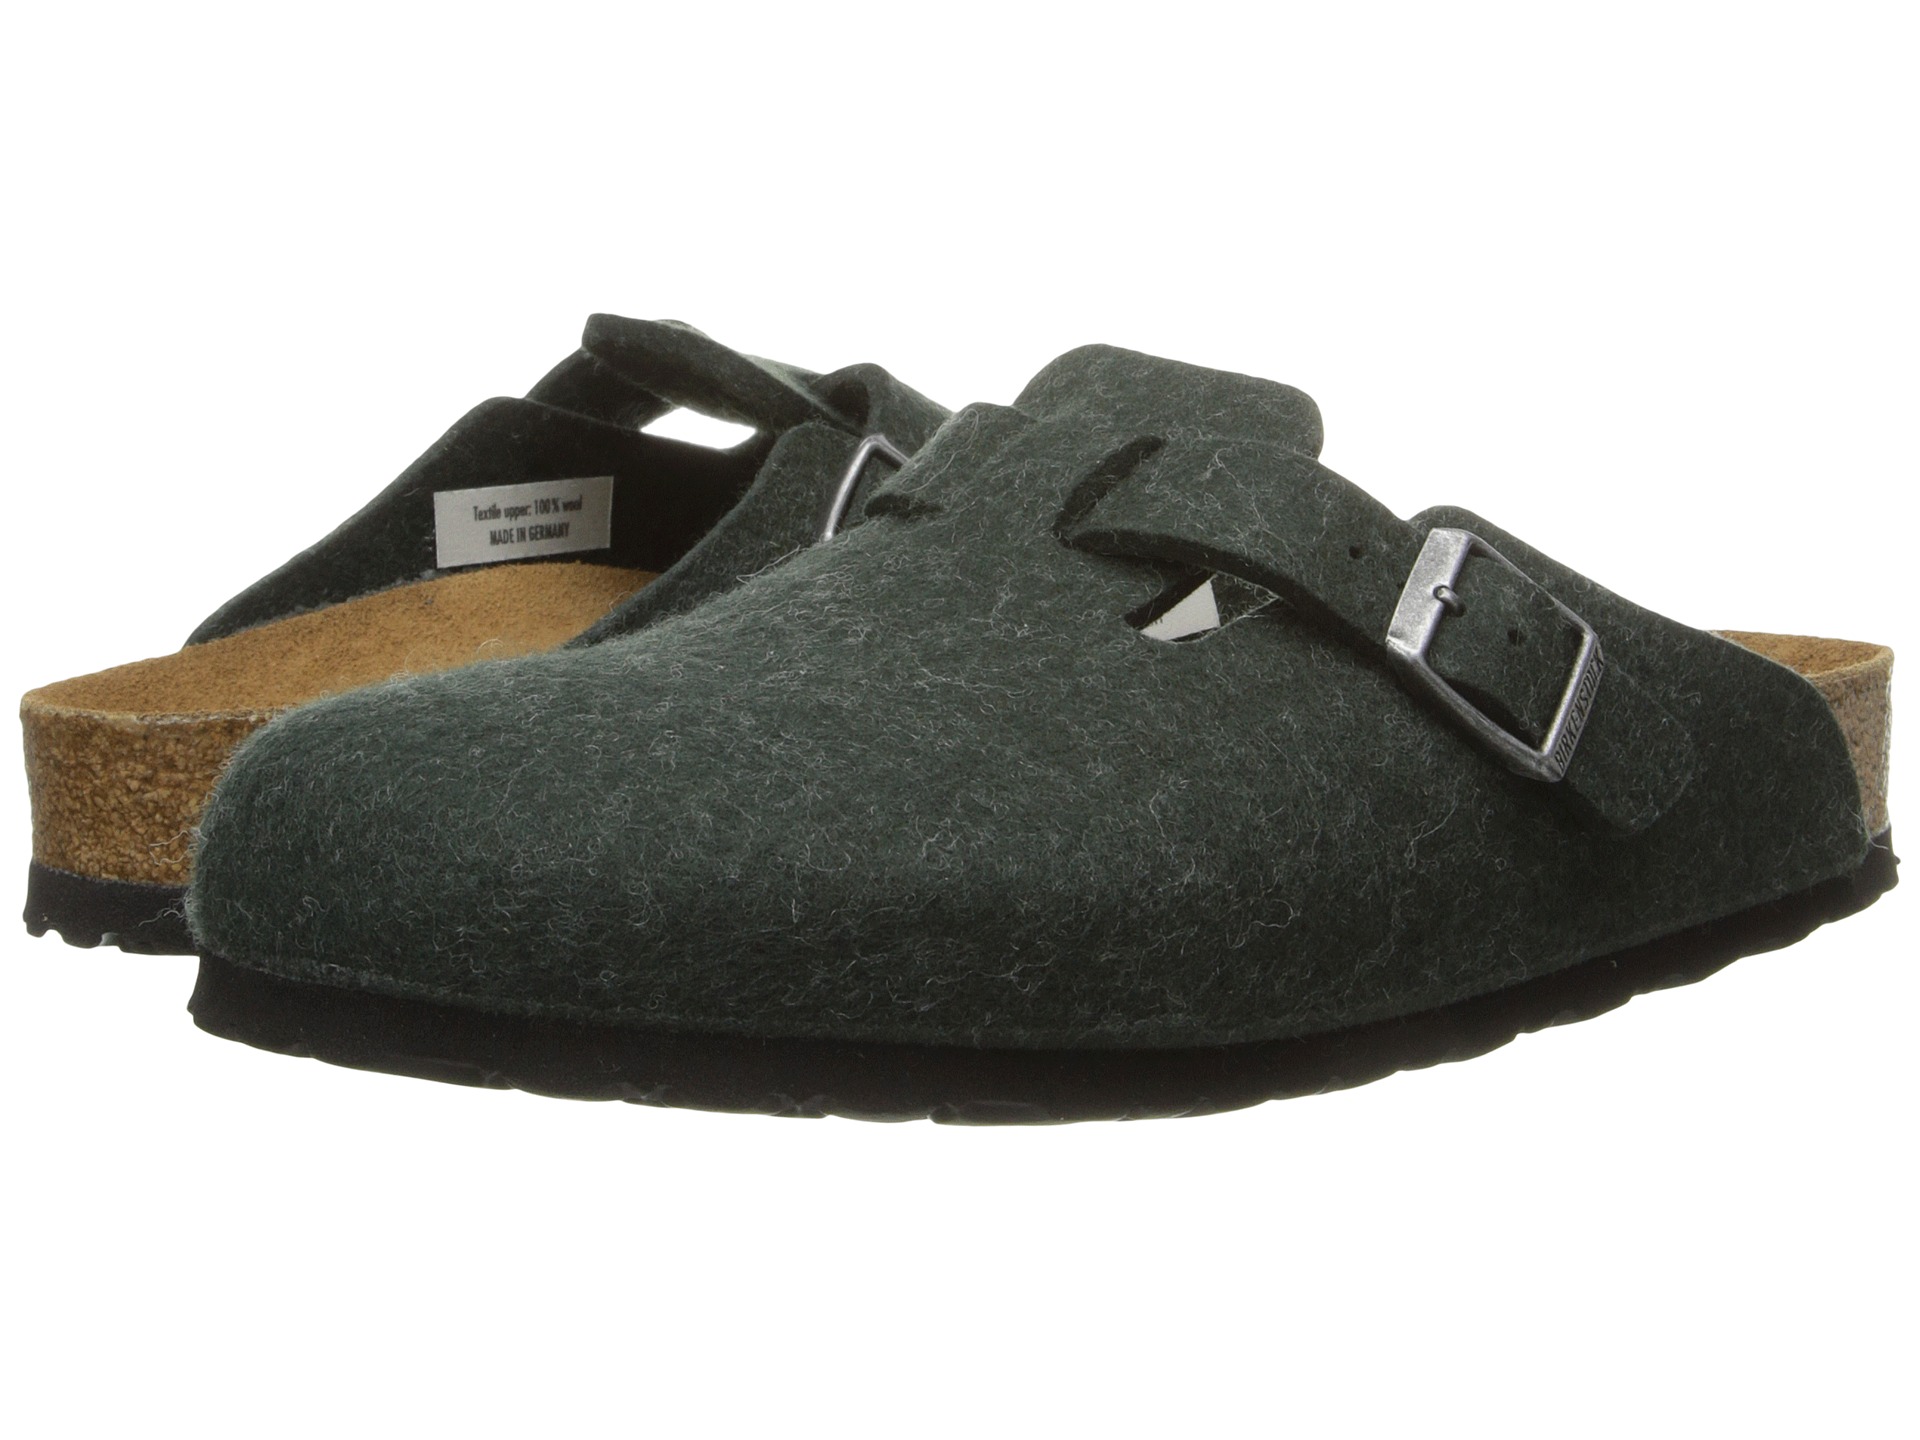 Birkenstock Boston Soft Footbed, Shoes | Shipped Free at Zappos